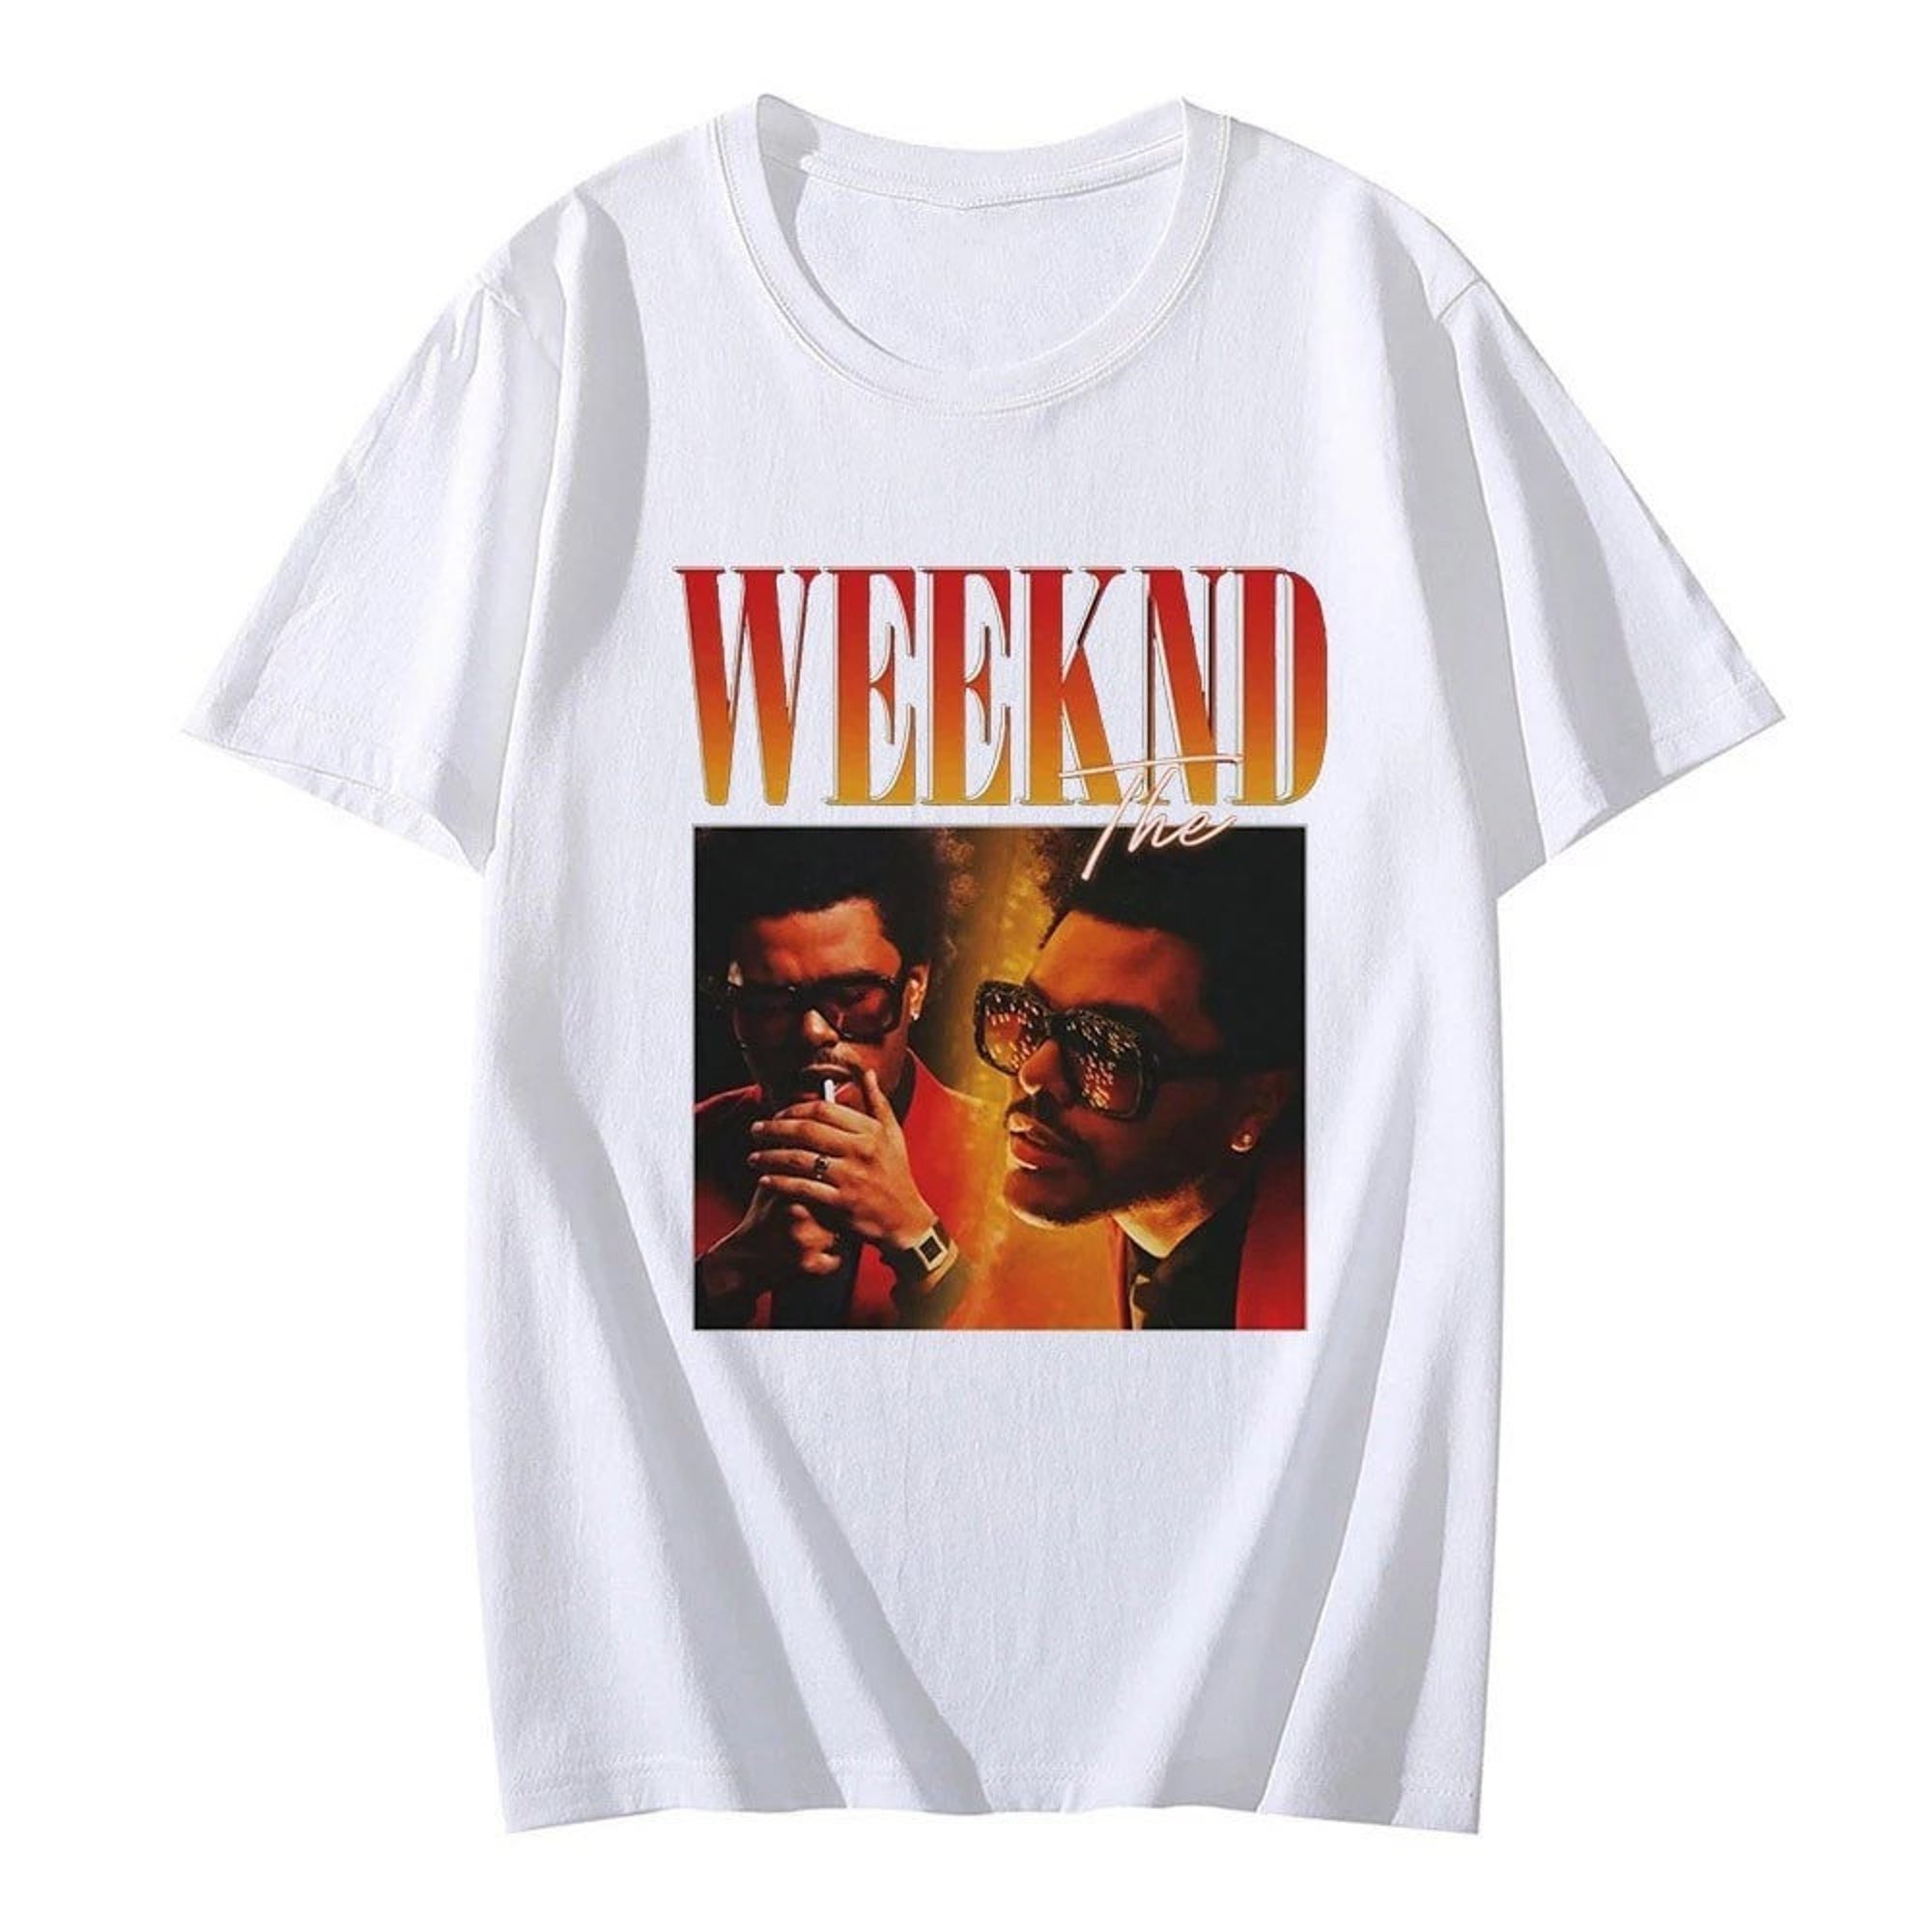 Discover The Weeknd Tshirt | The Weeknd Tee | 90s Vintage Tshirt | After Hours T-shirt | The Weekend Tshirt